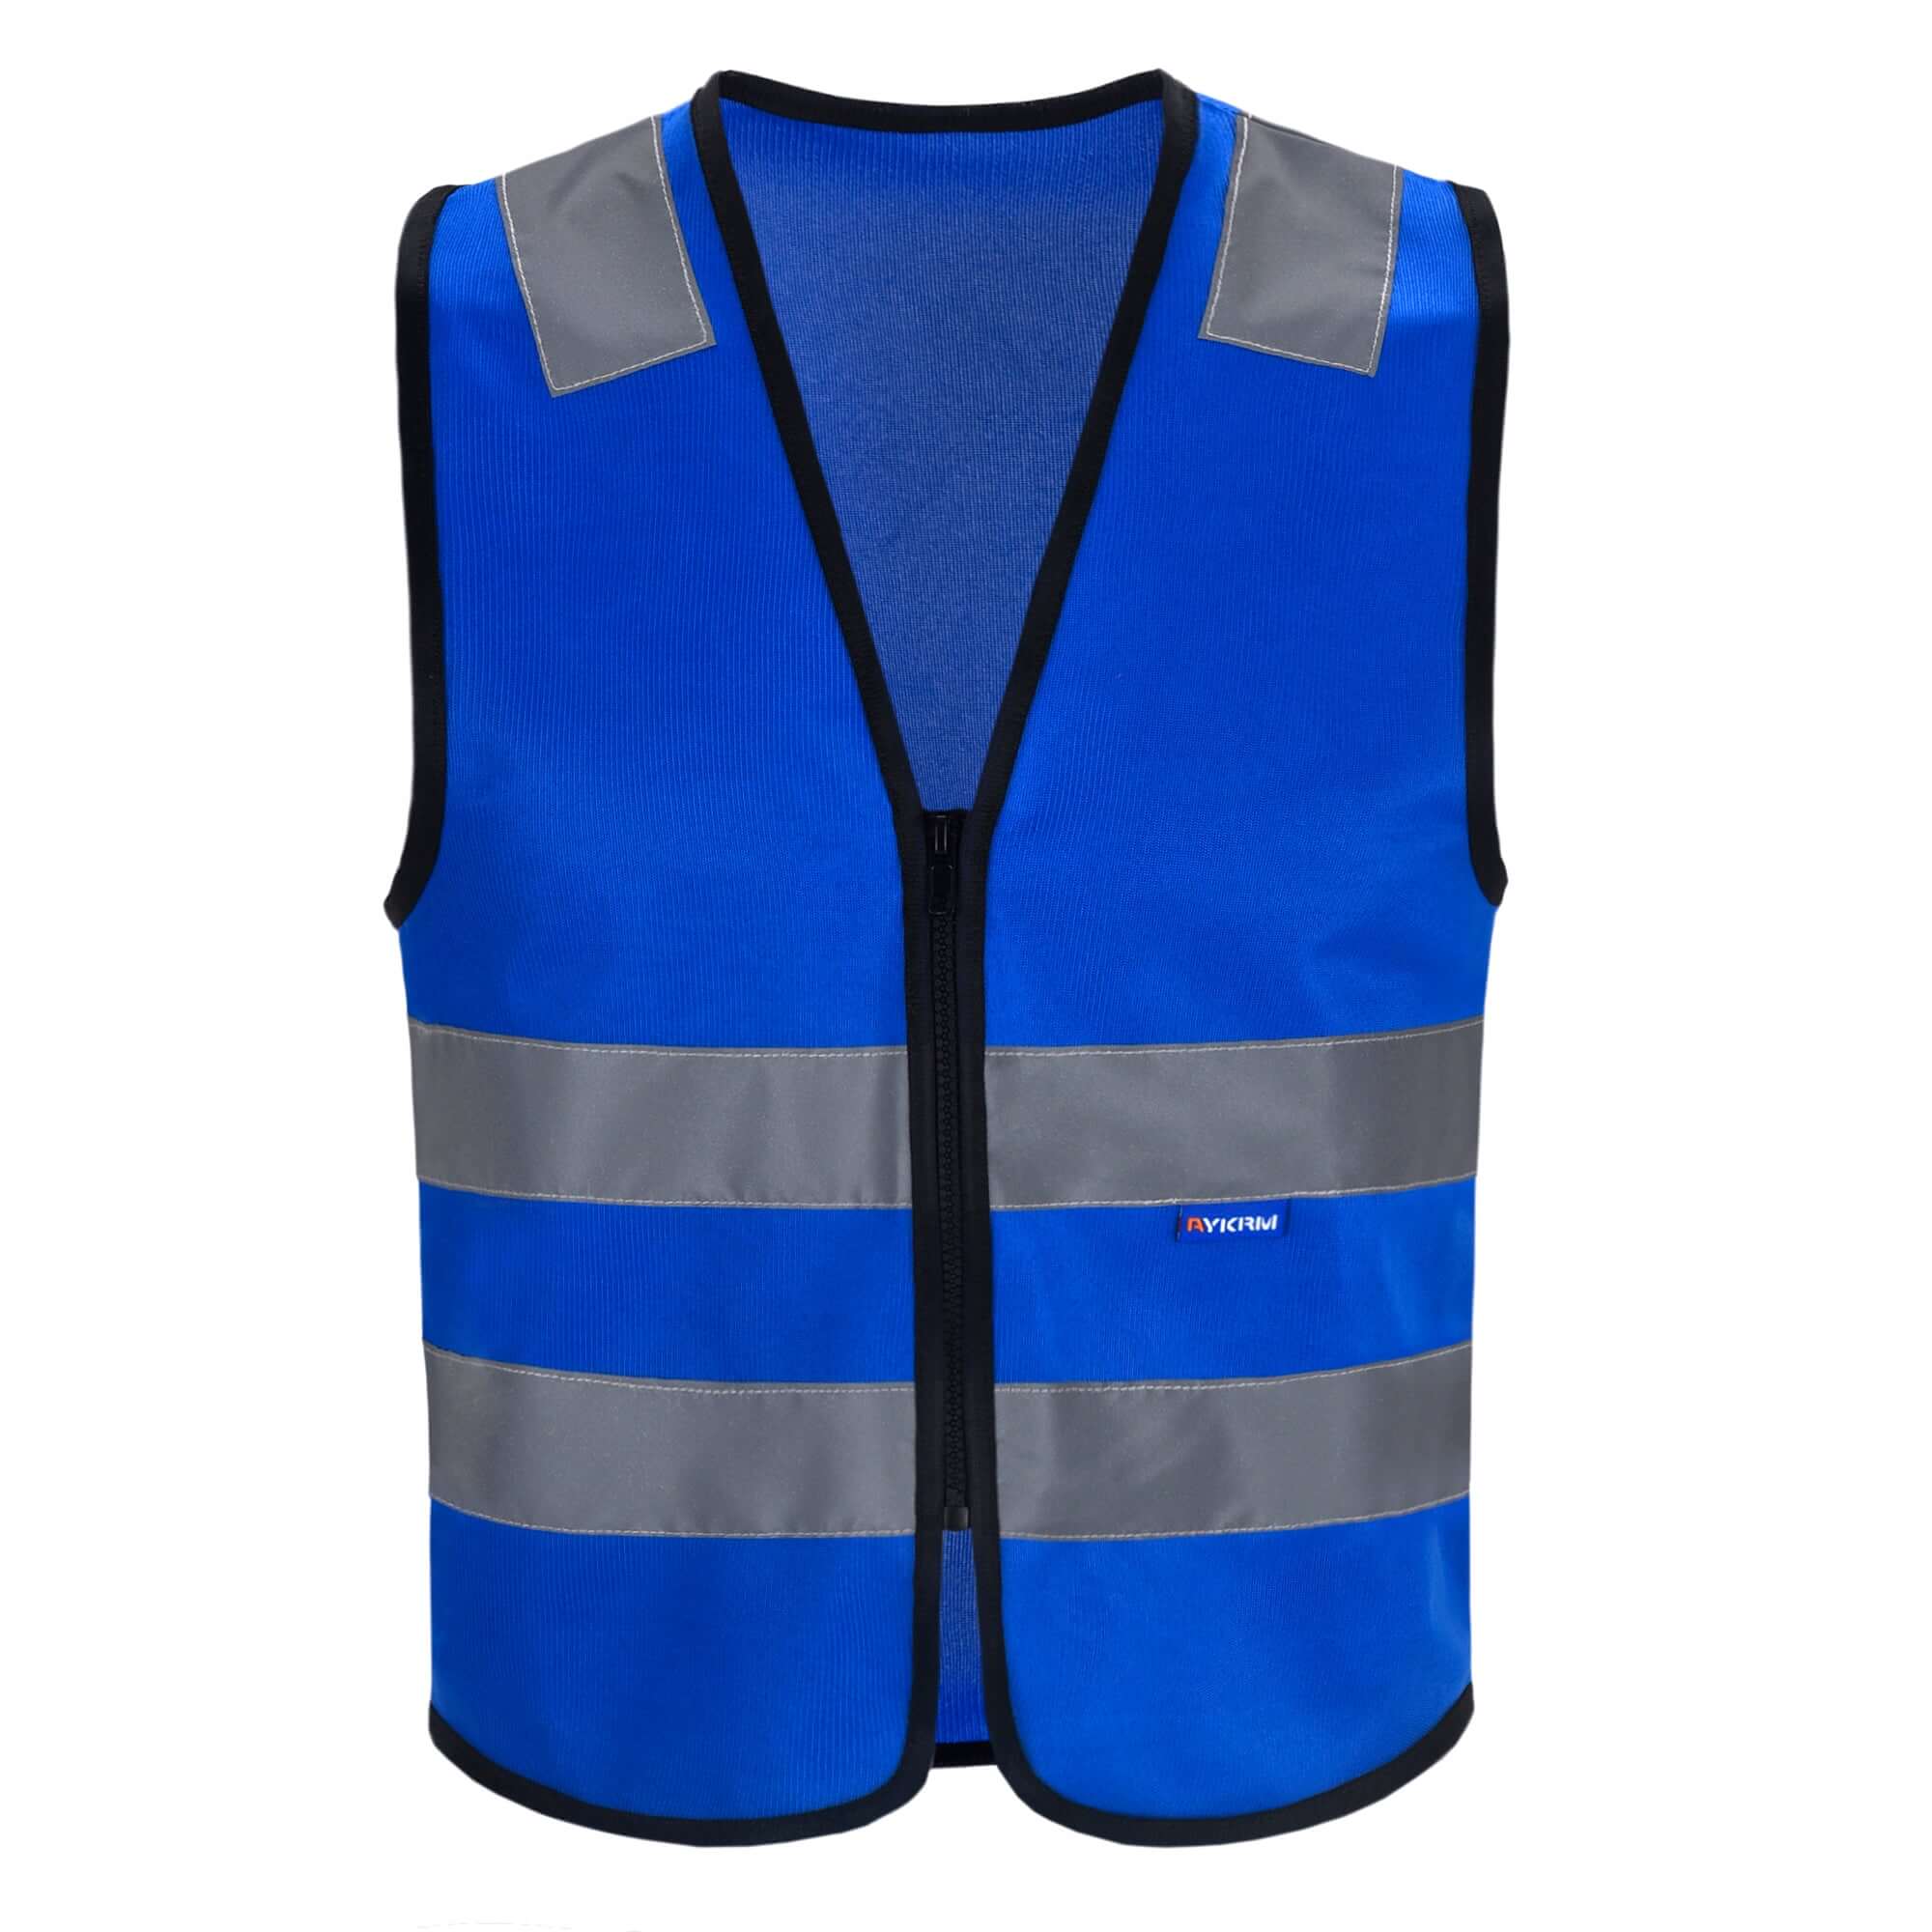 AYKRMHIVIS High Visibility Safety Vest With Pockets And Zipper